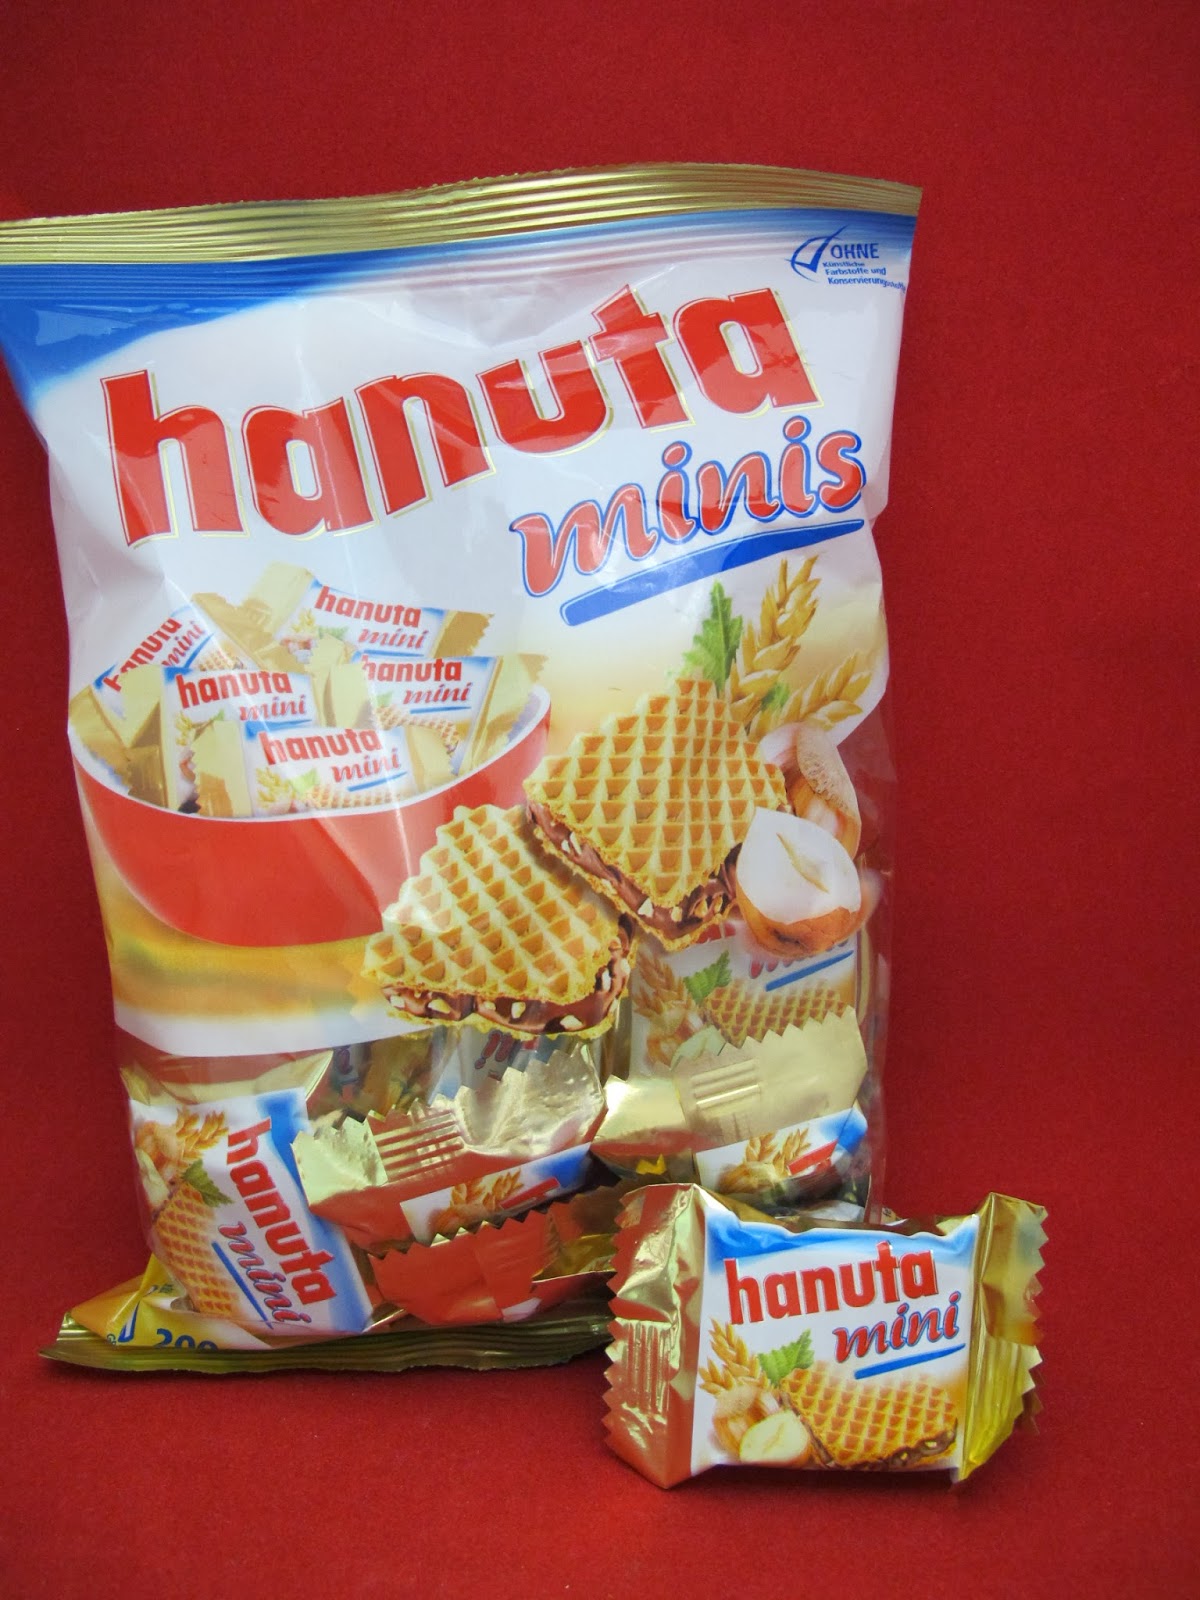 AVFTL: Have you heard about HANUTA? Read about it here!